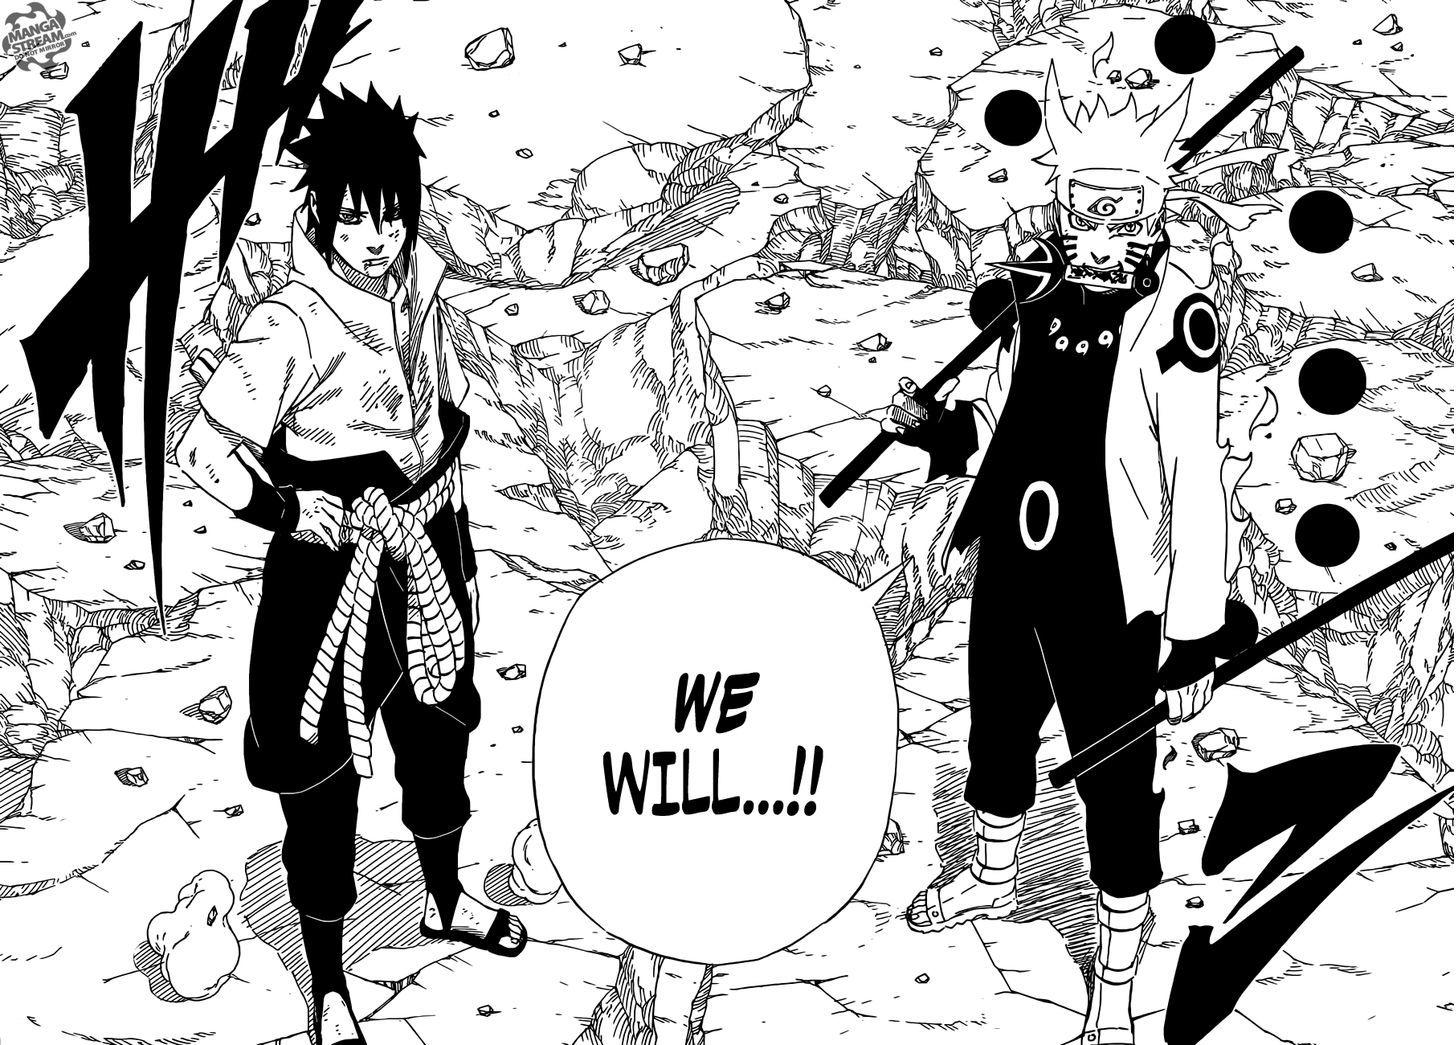 Vol.70 Chapter 673 – We Will…!! | 14 page